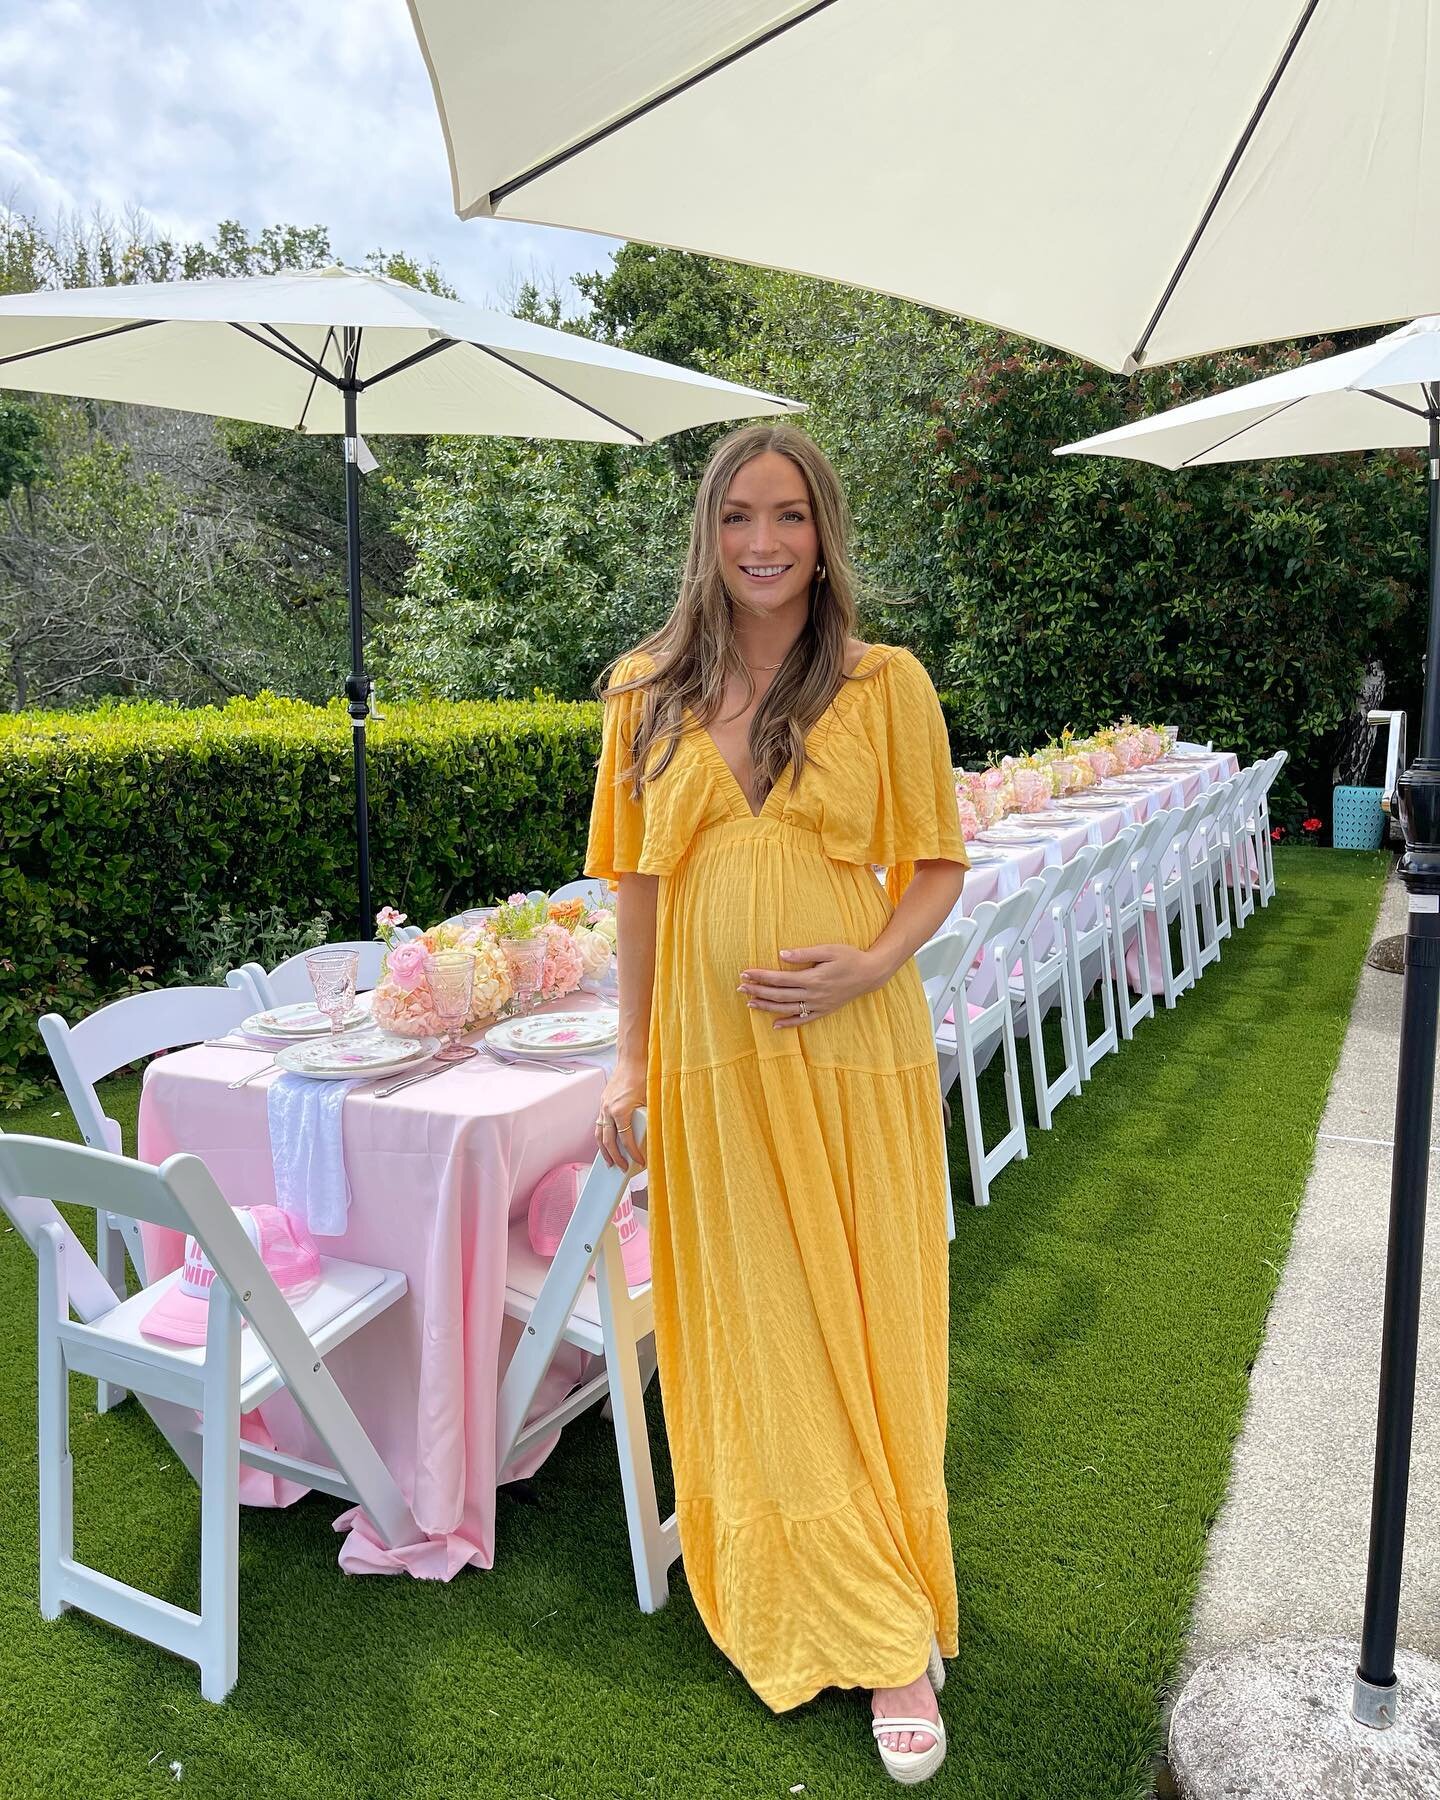 The best day celebrating our gals 🥹 Overwhelmed with gratitude for the support and love that surrounds us. #babyshower #twinpregnancy